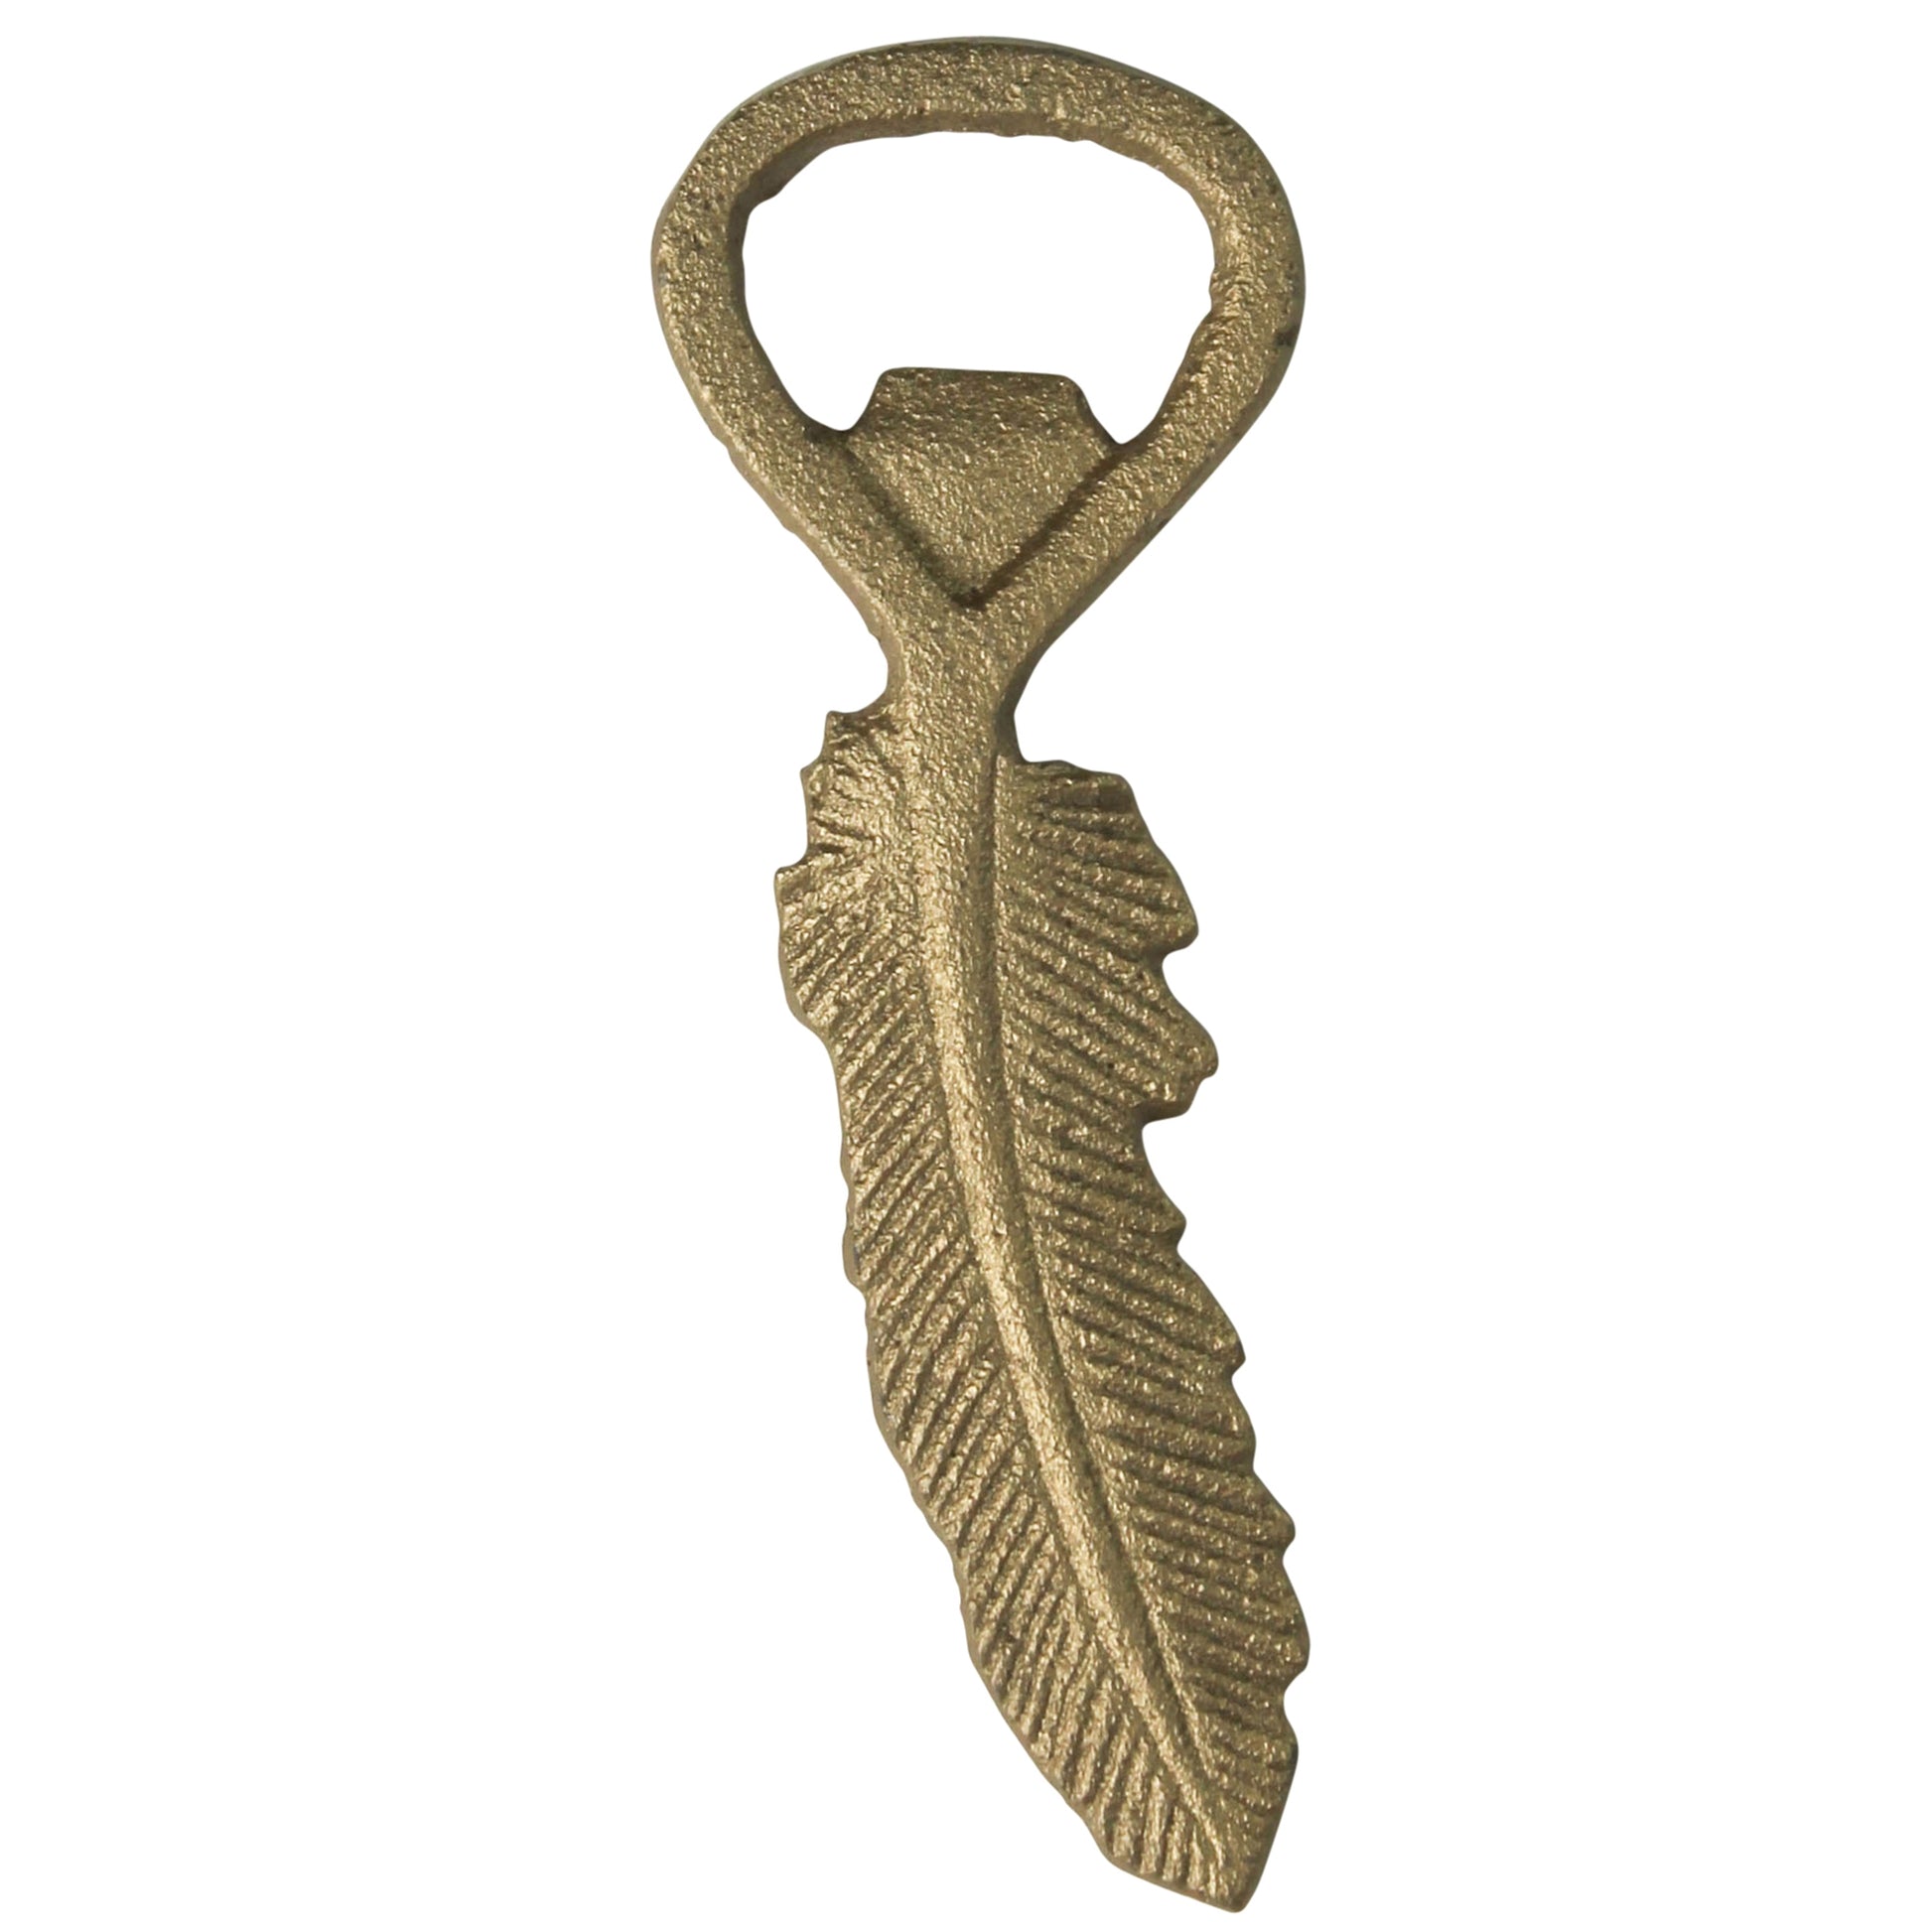 Image of a cast iron feather shape beer bottle opener.